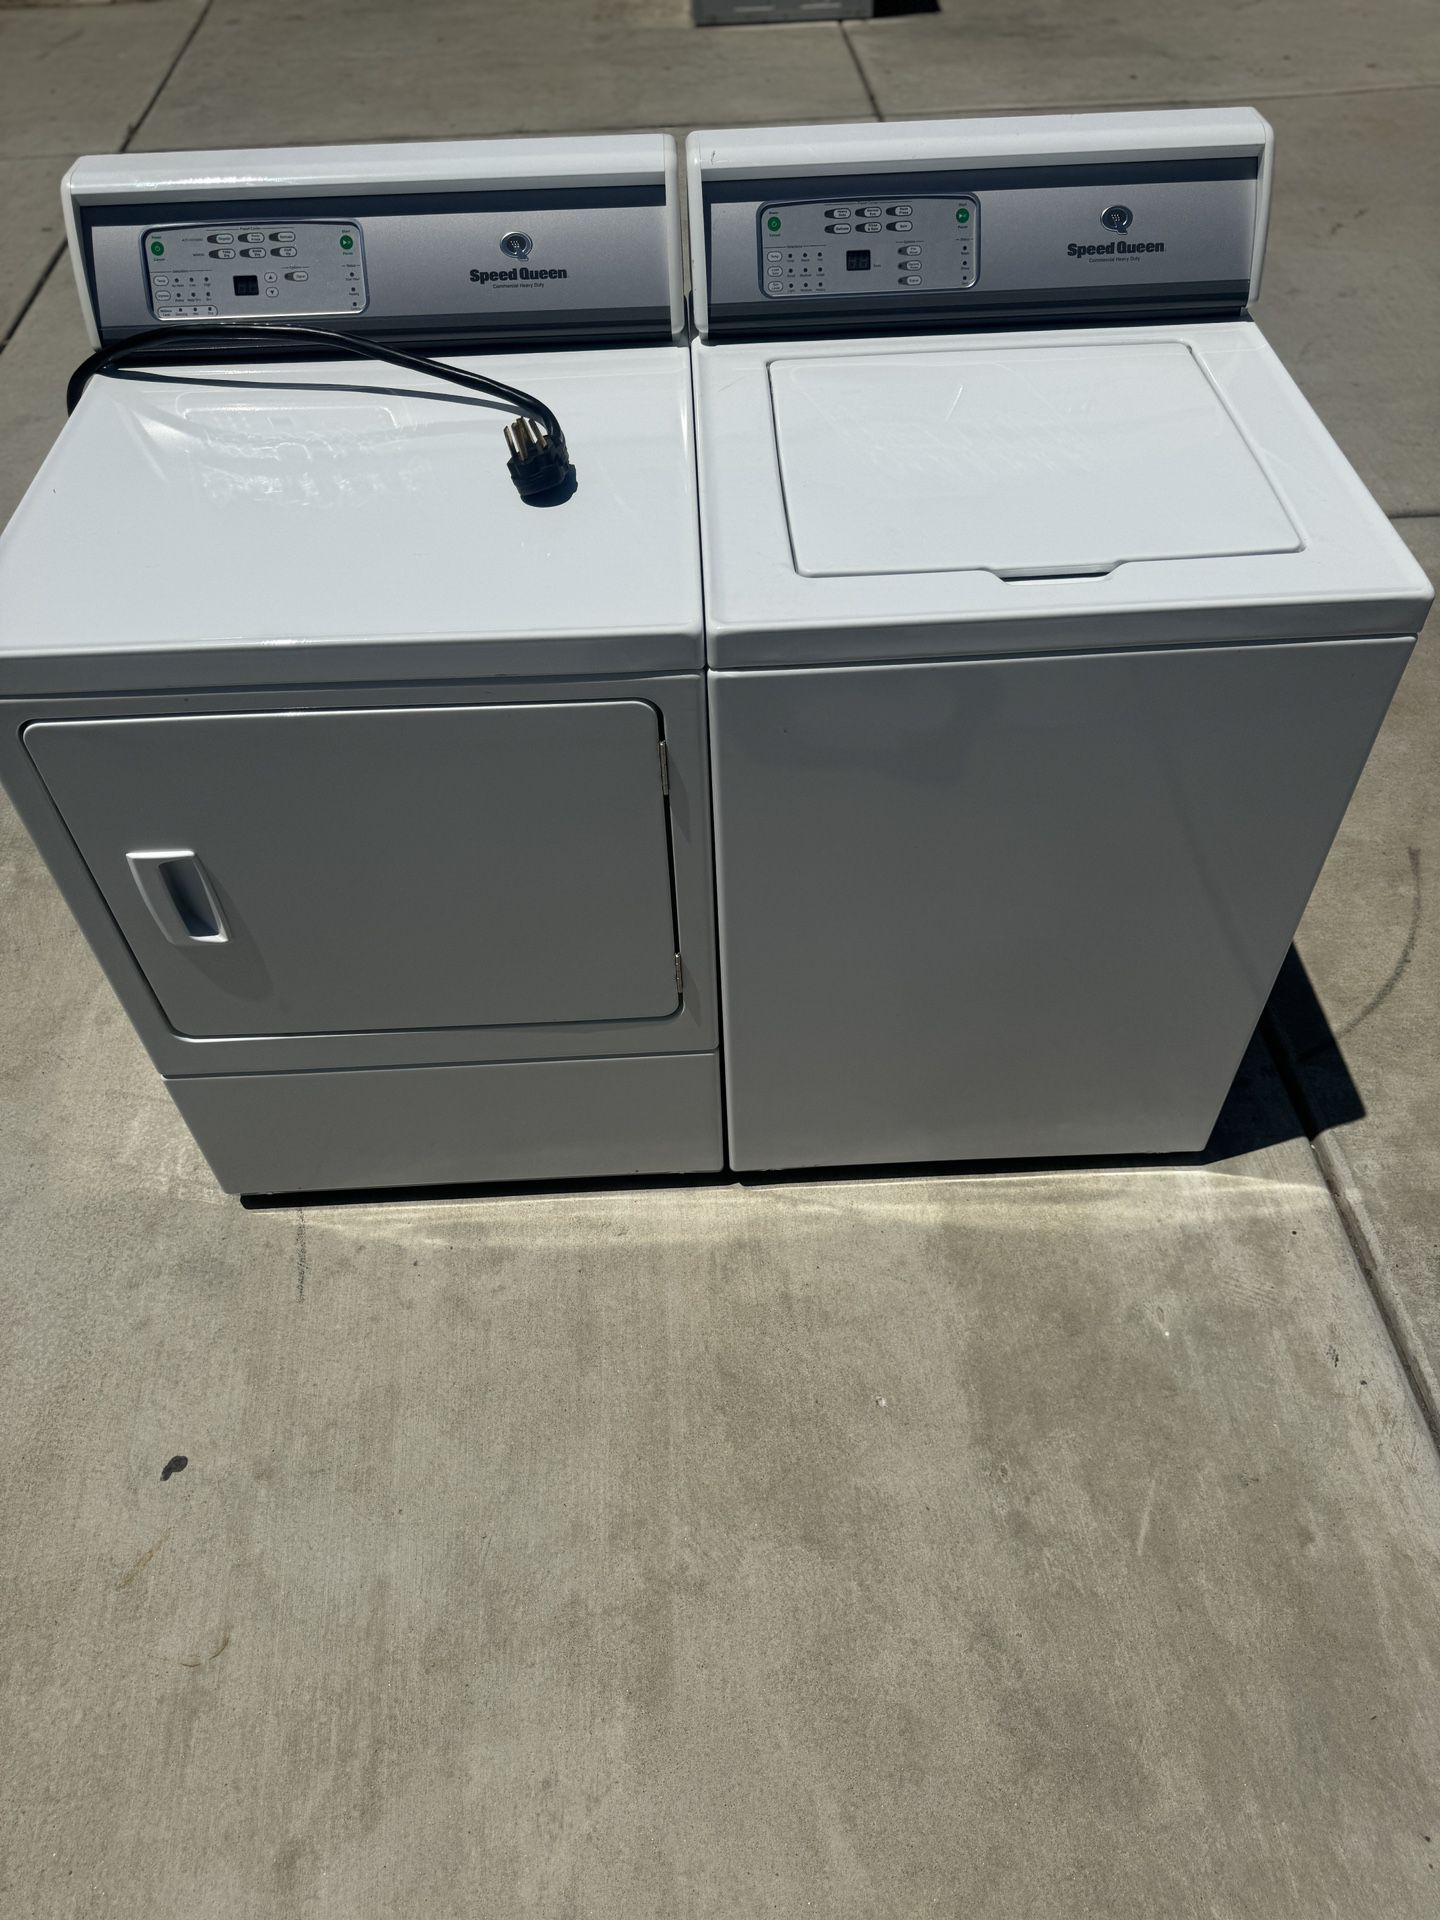 Speed Queen Washer And Electric Dryer Set 100% Working 